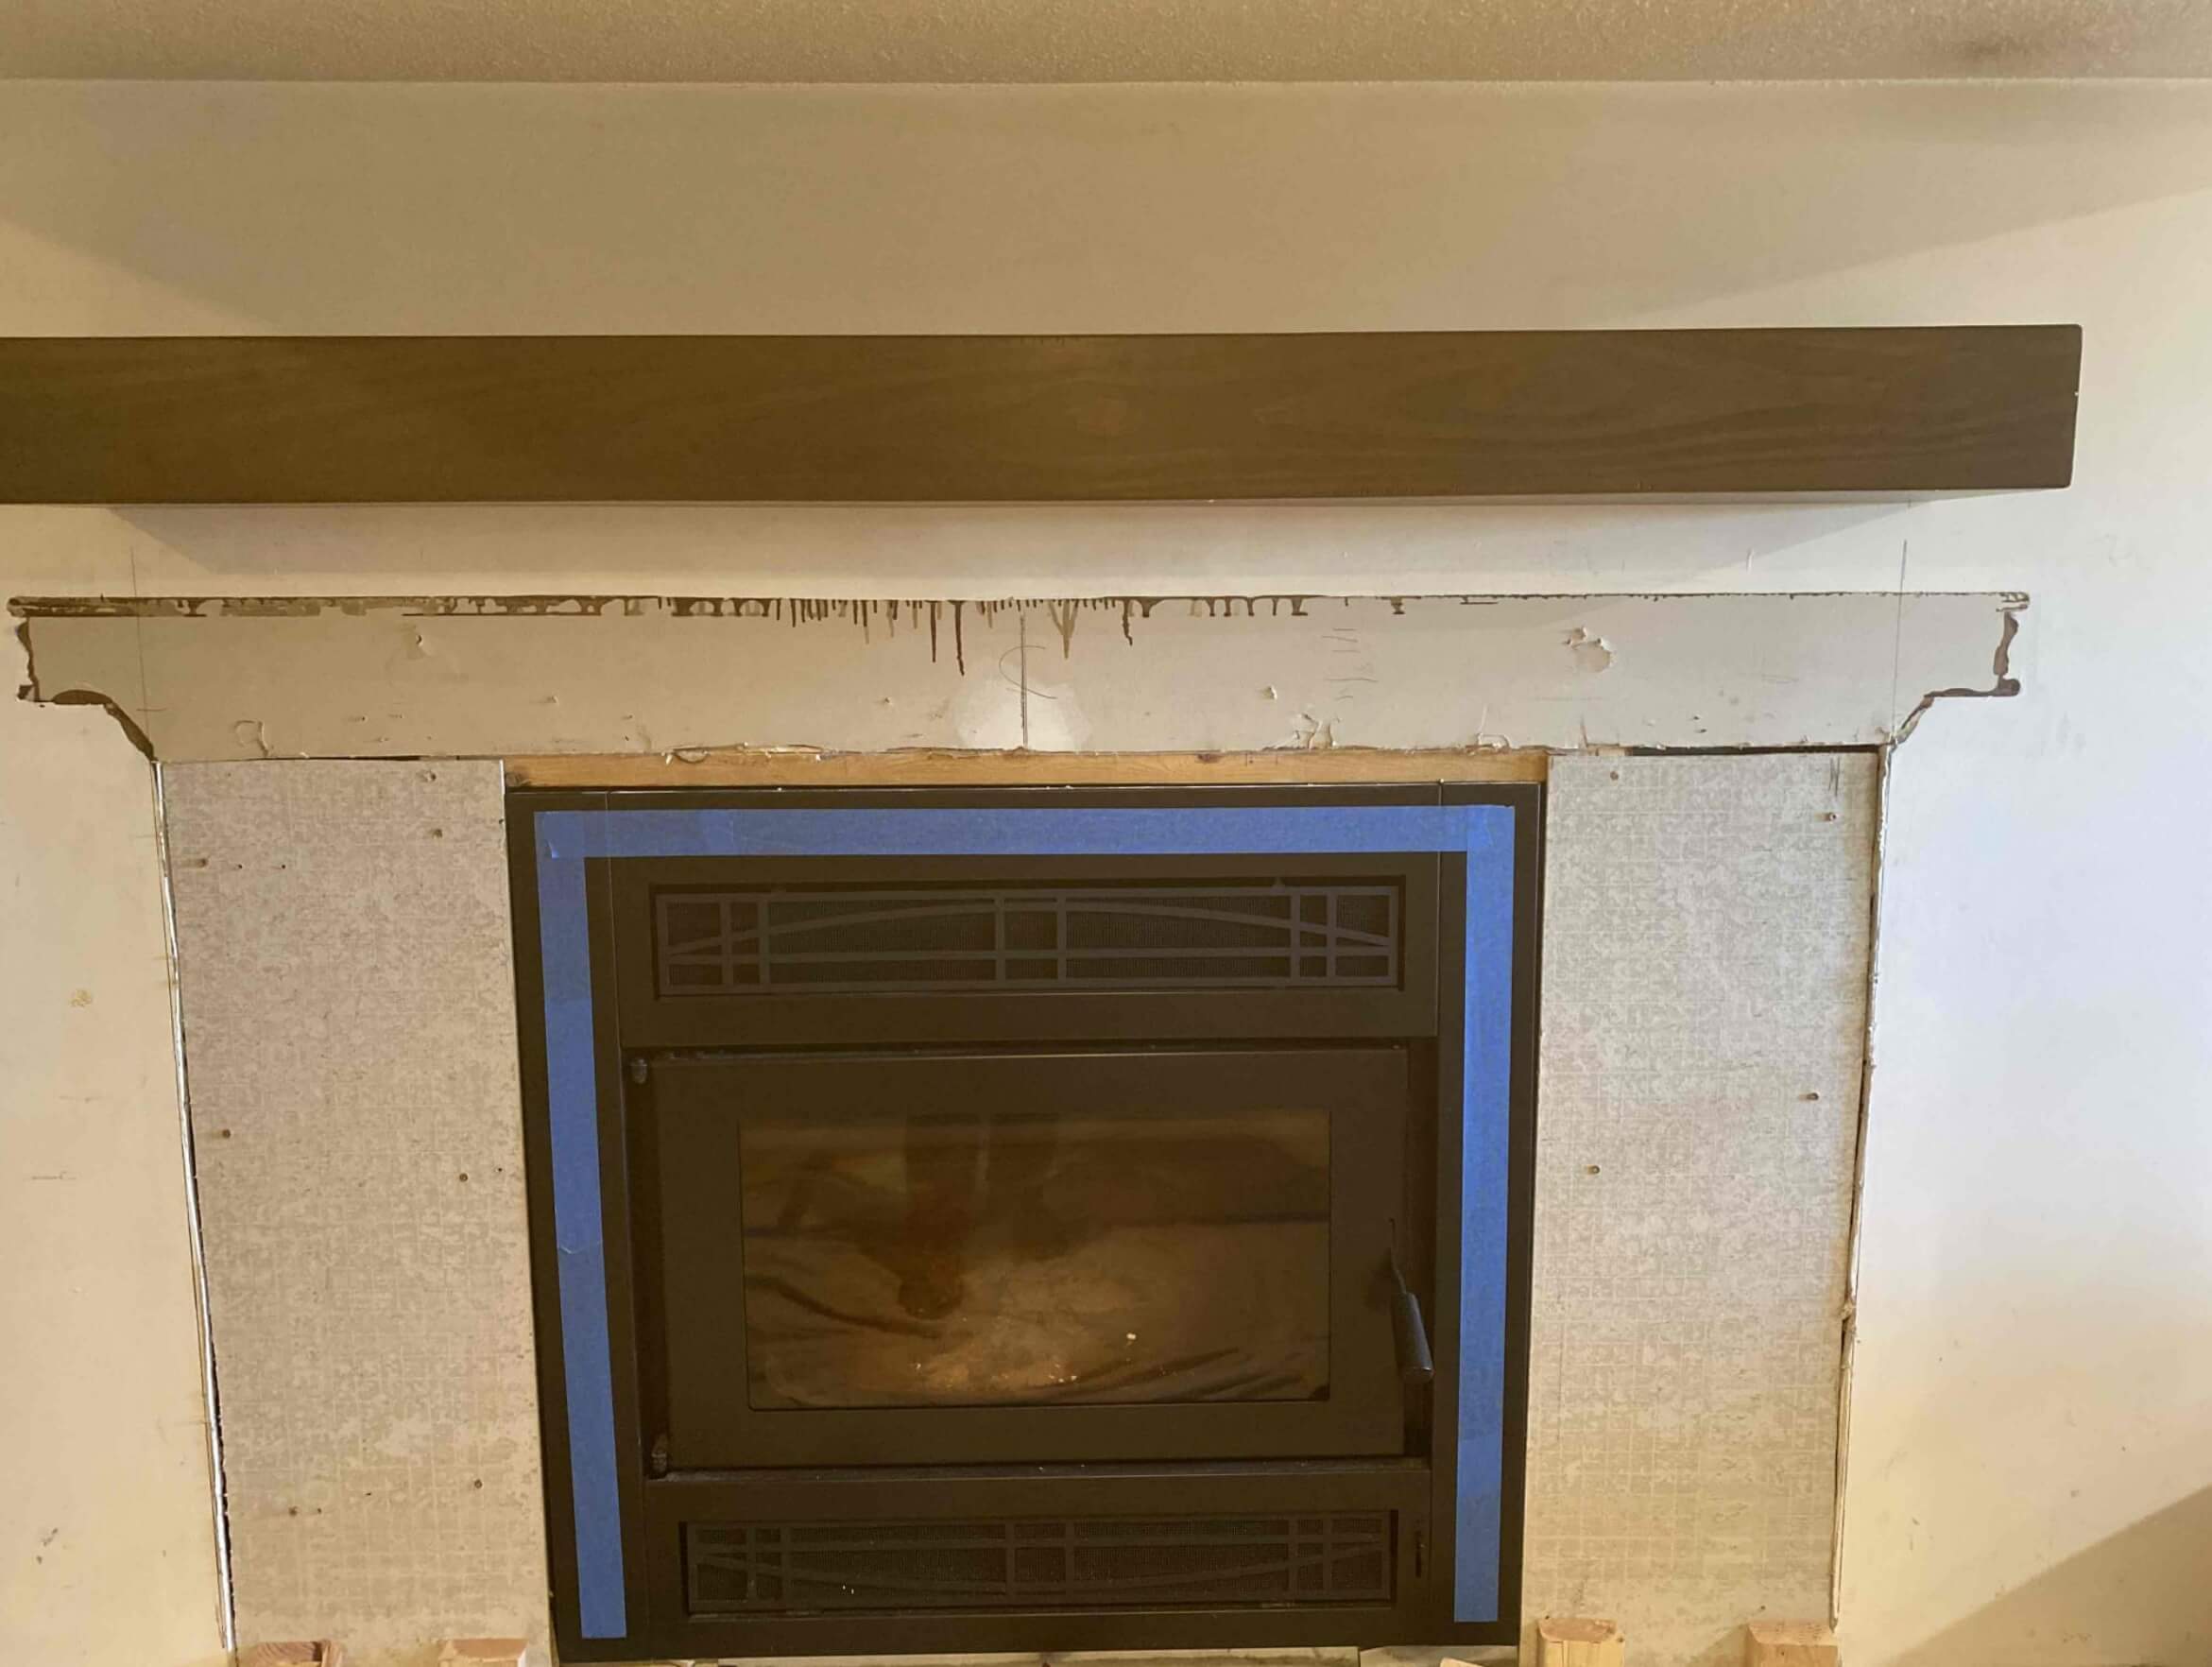 High Efficiency wood stove insert during